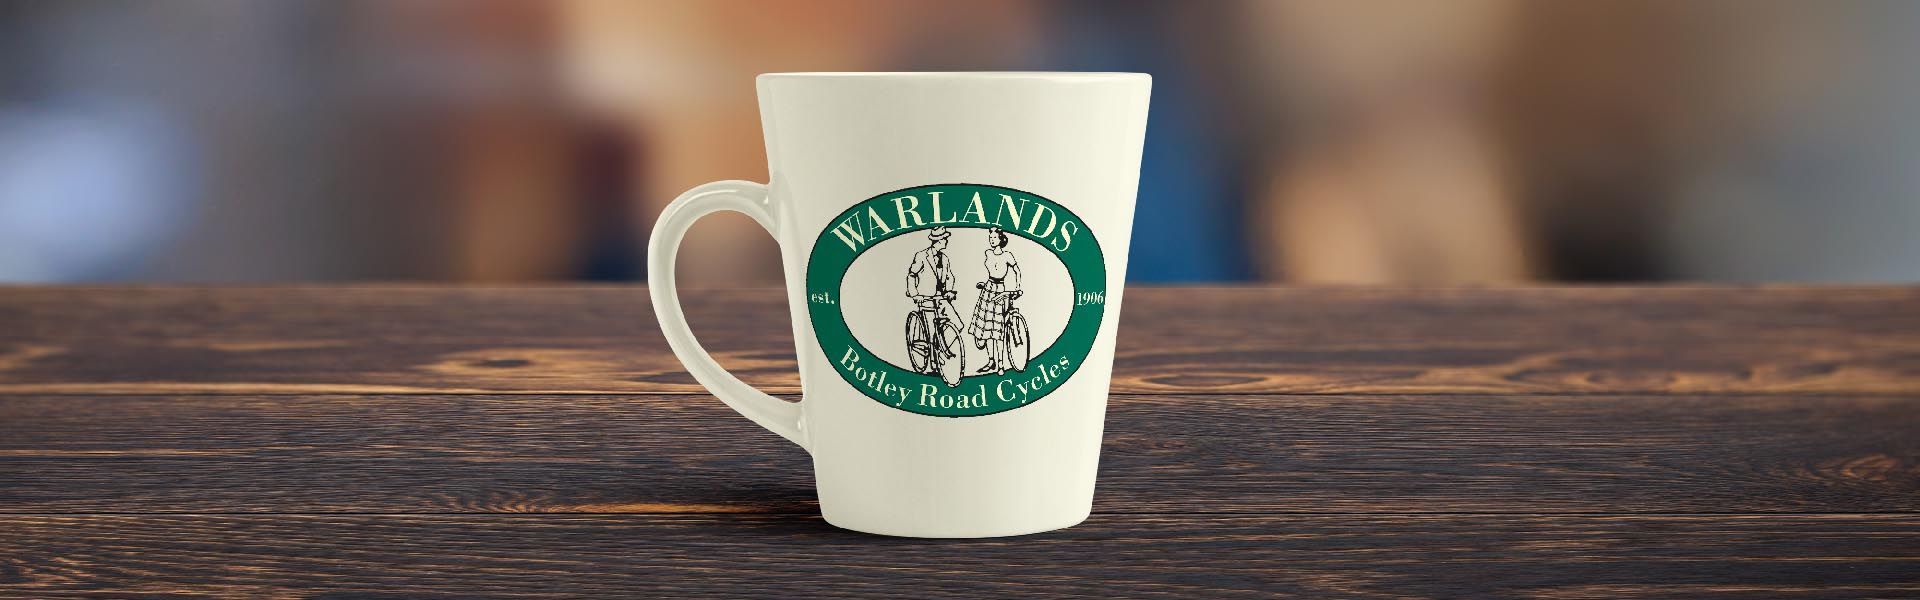 a tall coffee mug with the warlands logo on it